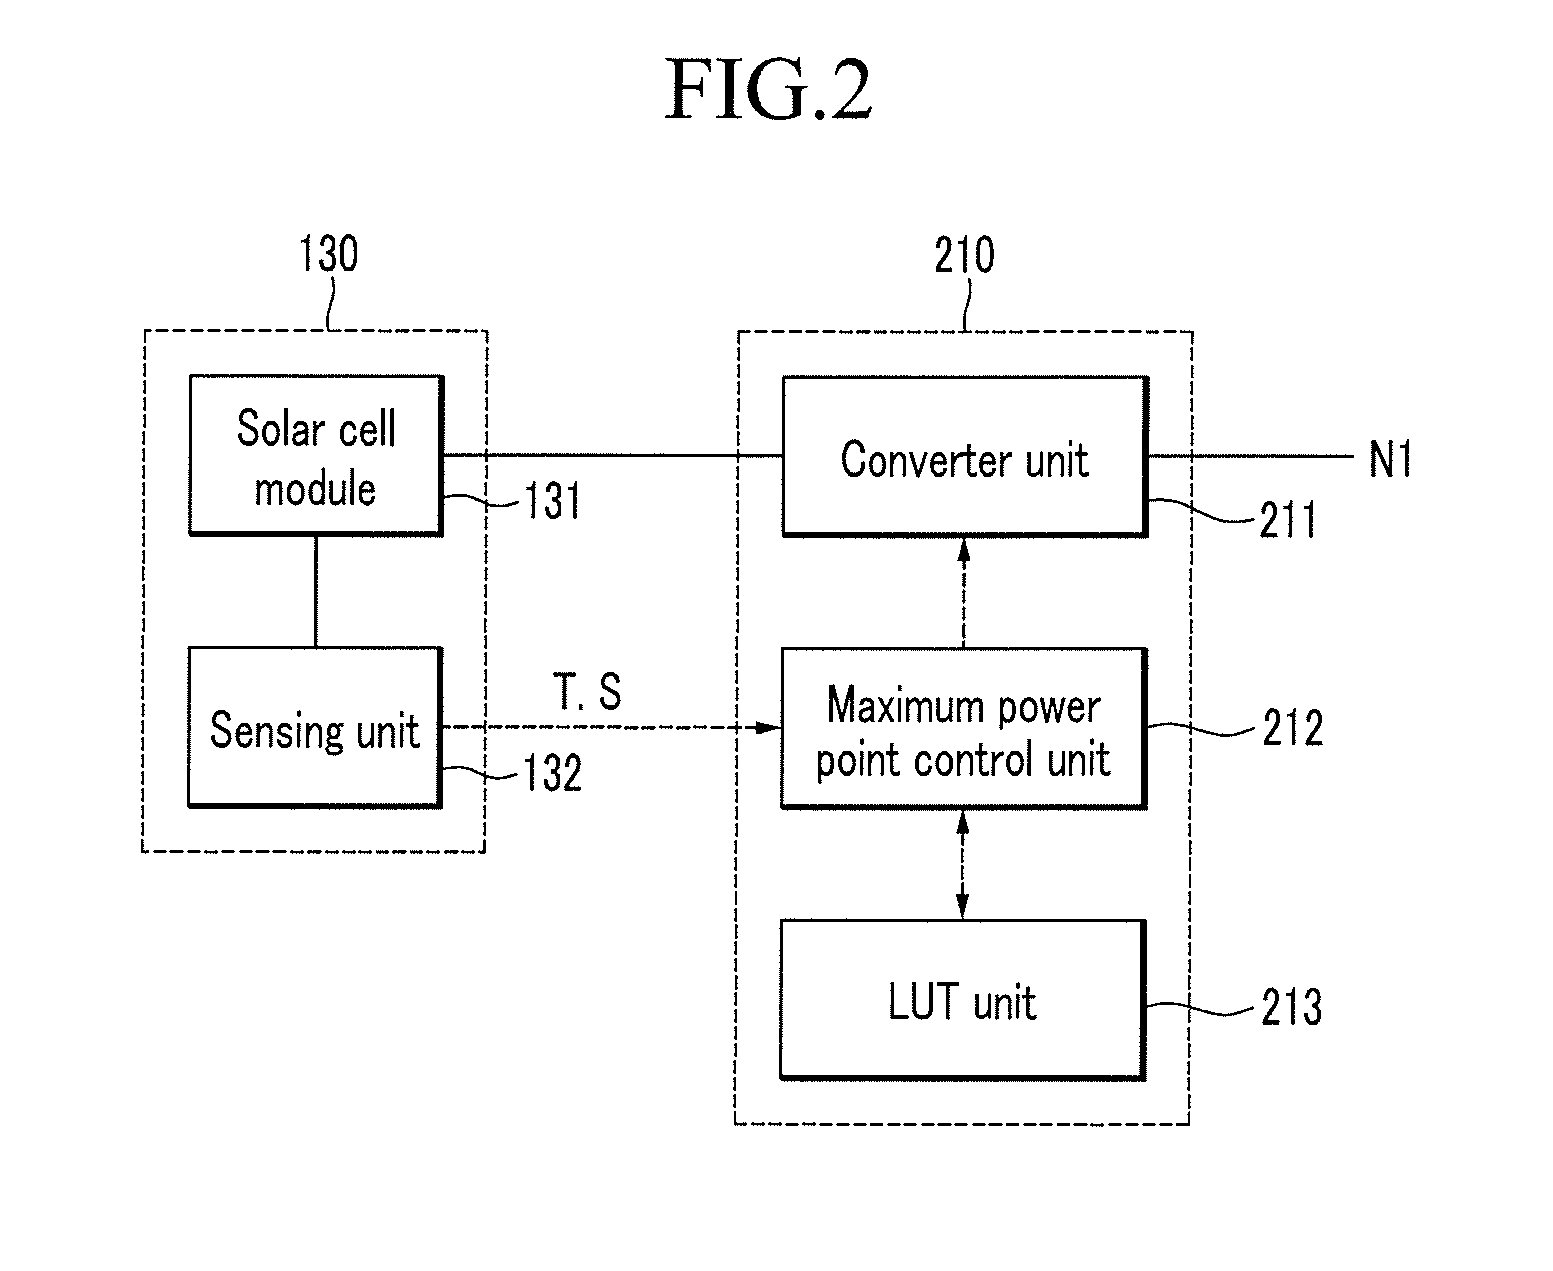 Apparatus and method for tracking maximum power point and method of operating grid-tied power storage system using the same